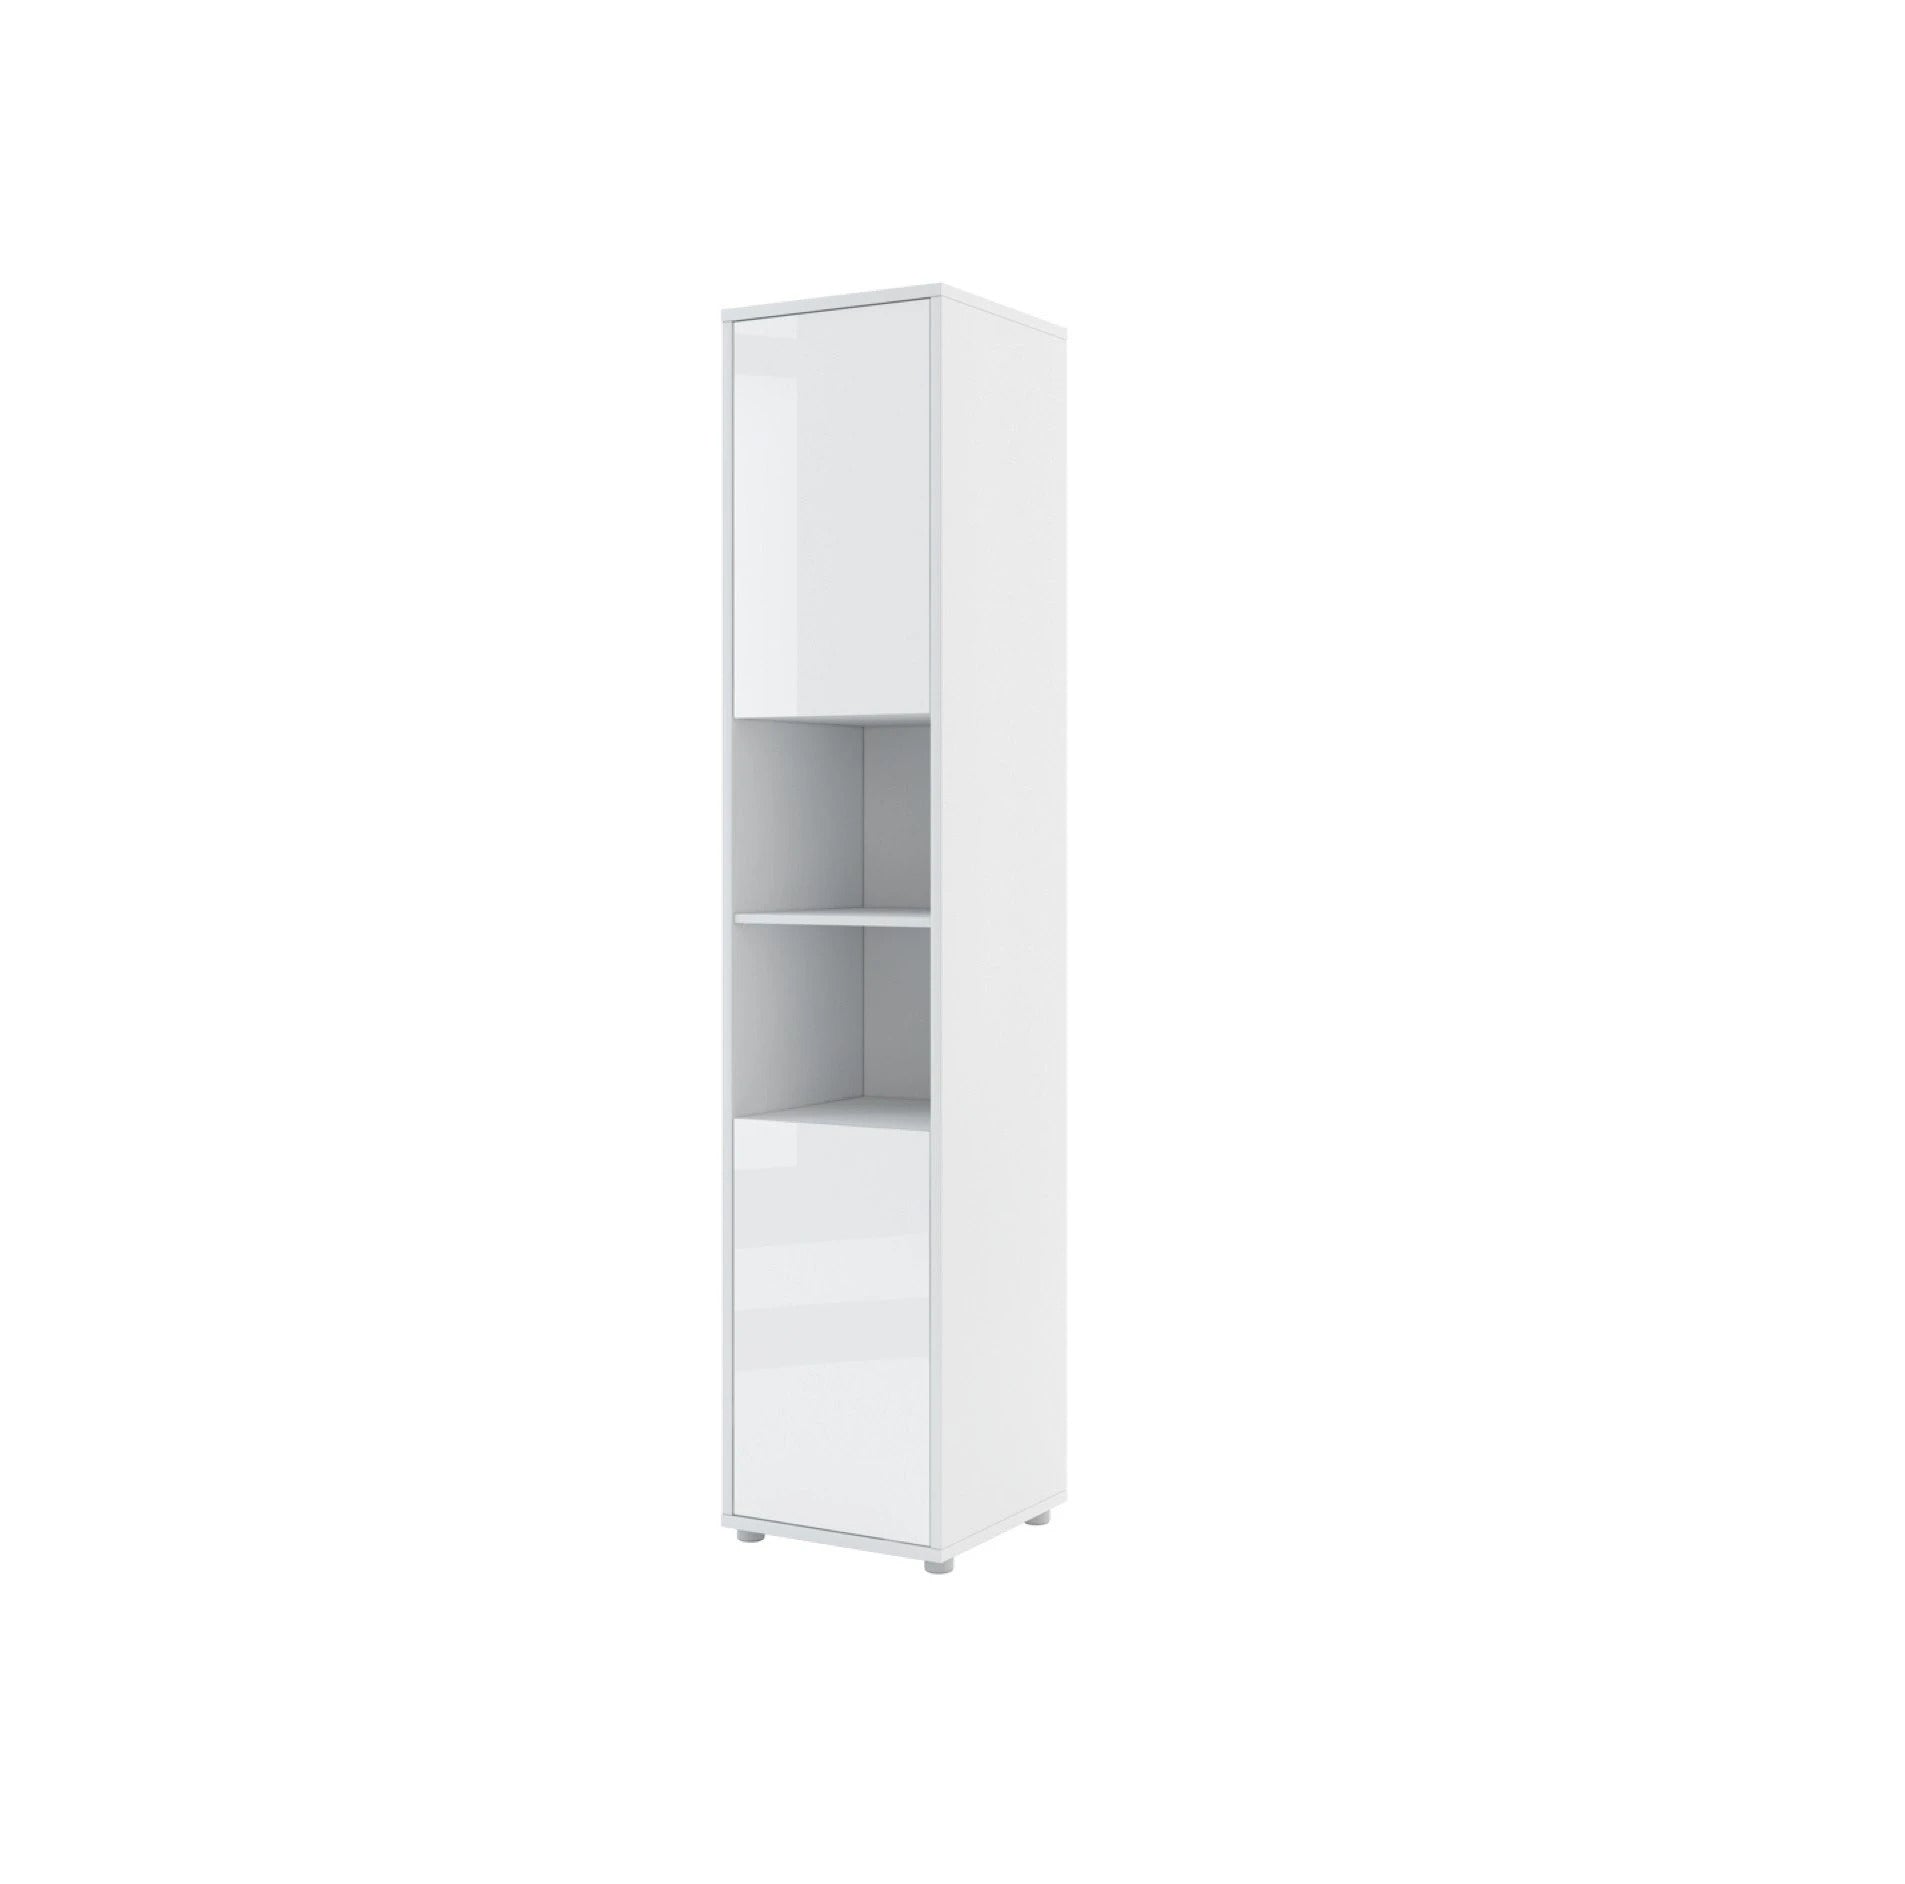 BC-08 Tall Storage Cabinet for Vertical Wall Bed Concept White Gloss Tall Storage Cabinet 